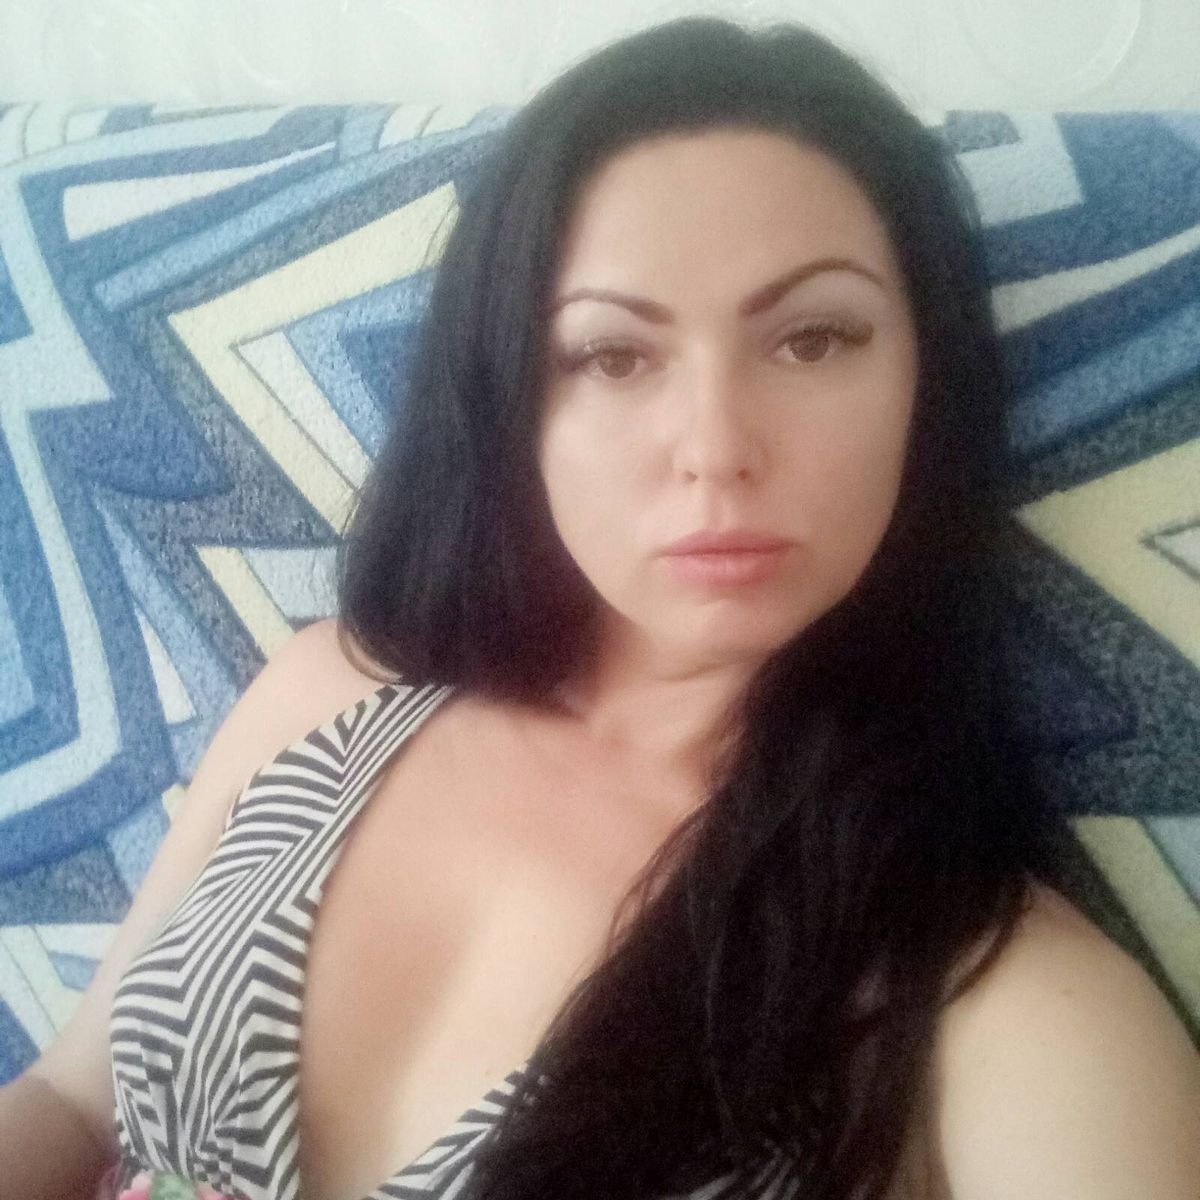 SkyPrivate live sex chat with Kceniy